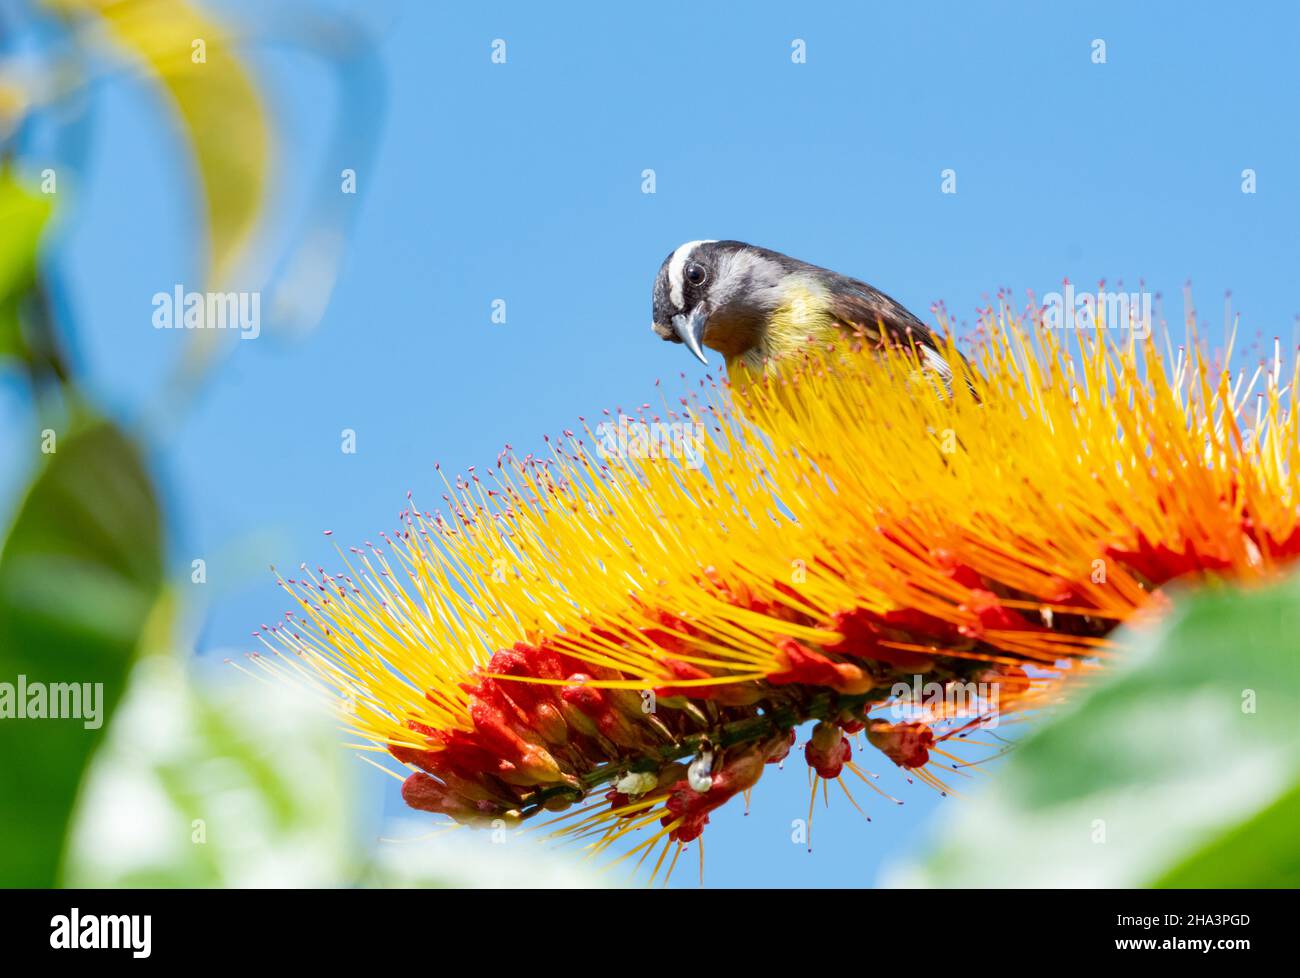 Small yellow and black Bananquit, Coereba flaveola, feeding on a tropical Combretum flower in bright sunlight. Stock Photo